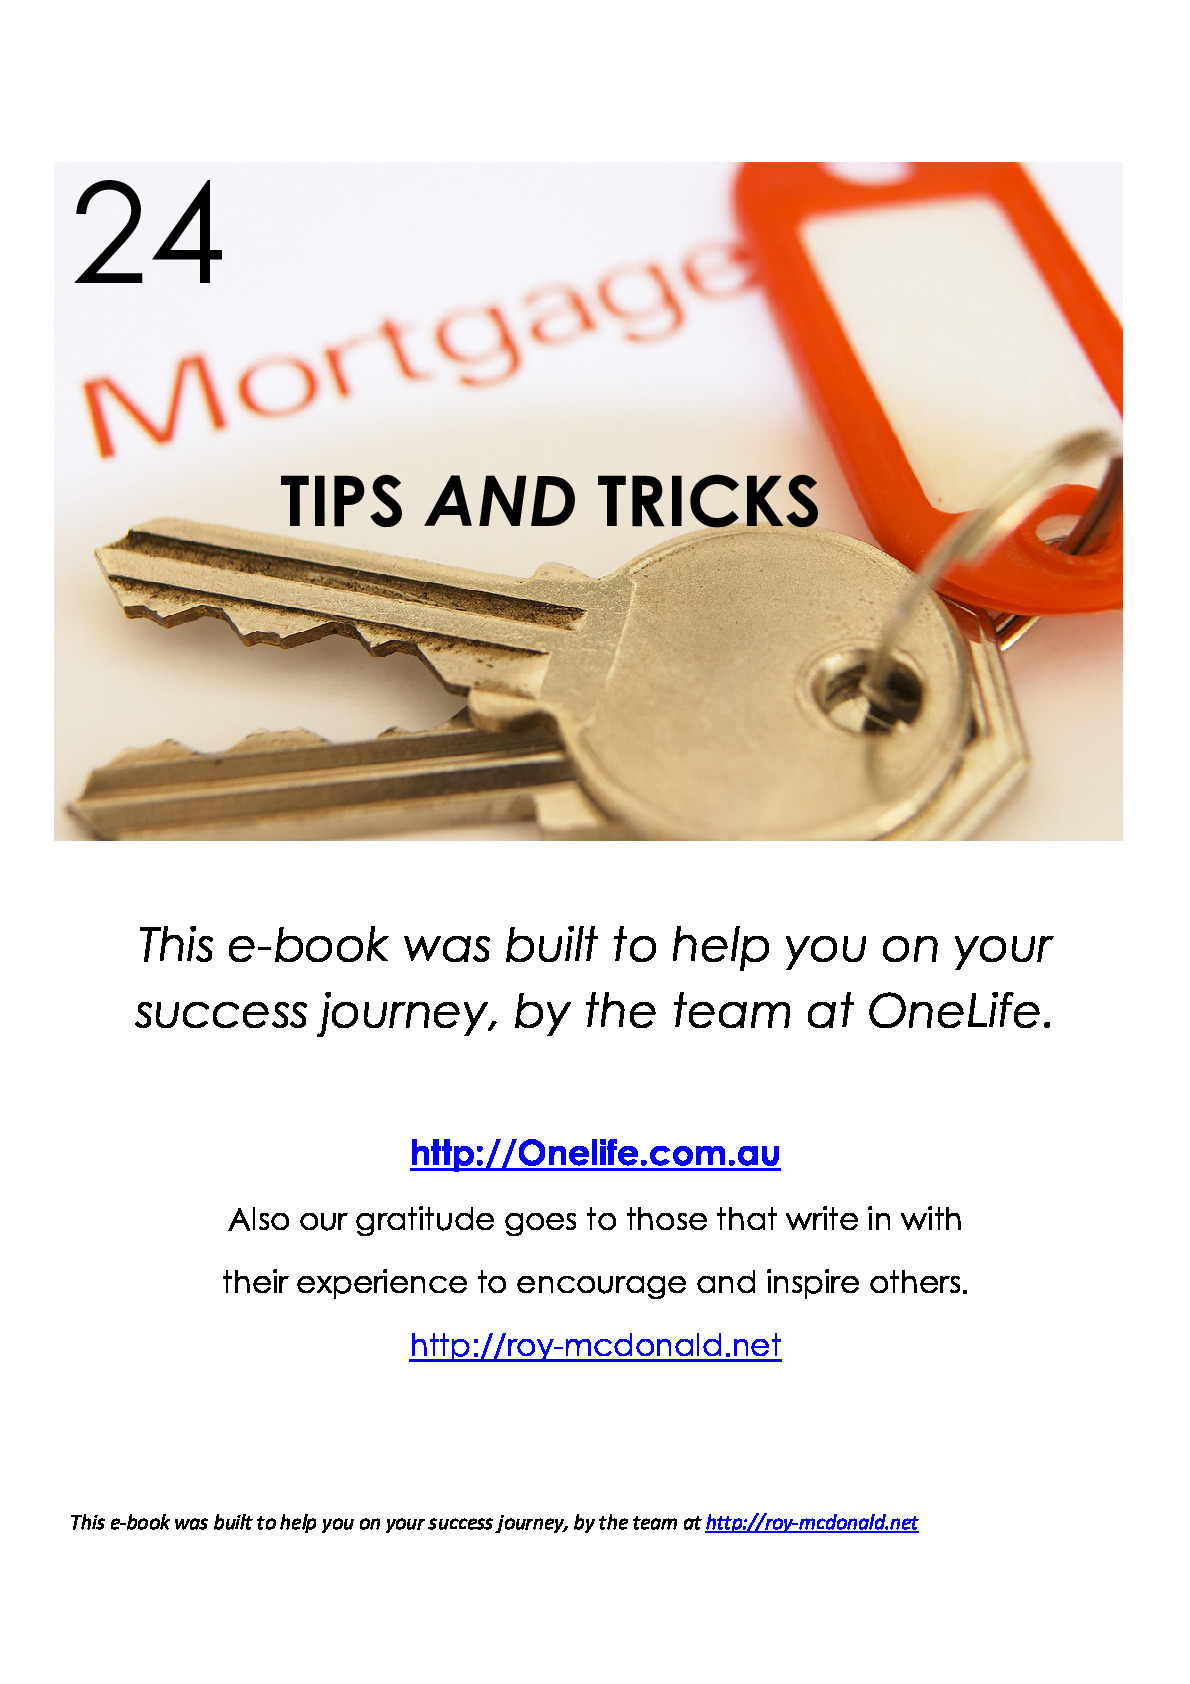 24-mortgage-tips-and-tricks